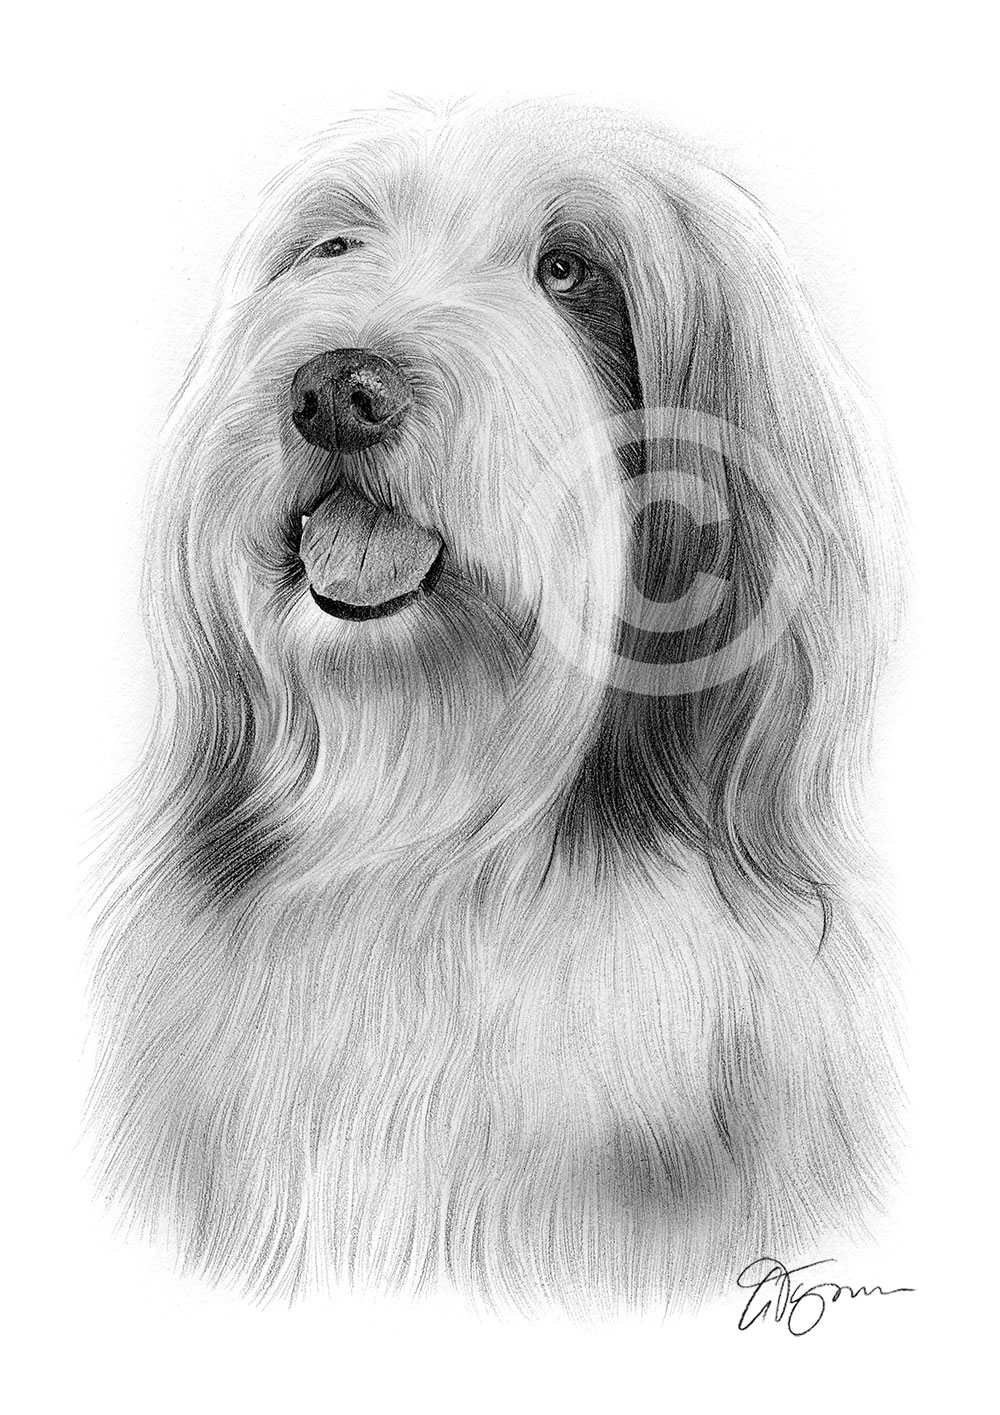 Pencil drawing of a Bearded Collie by artist Gary Tymon